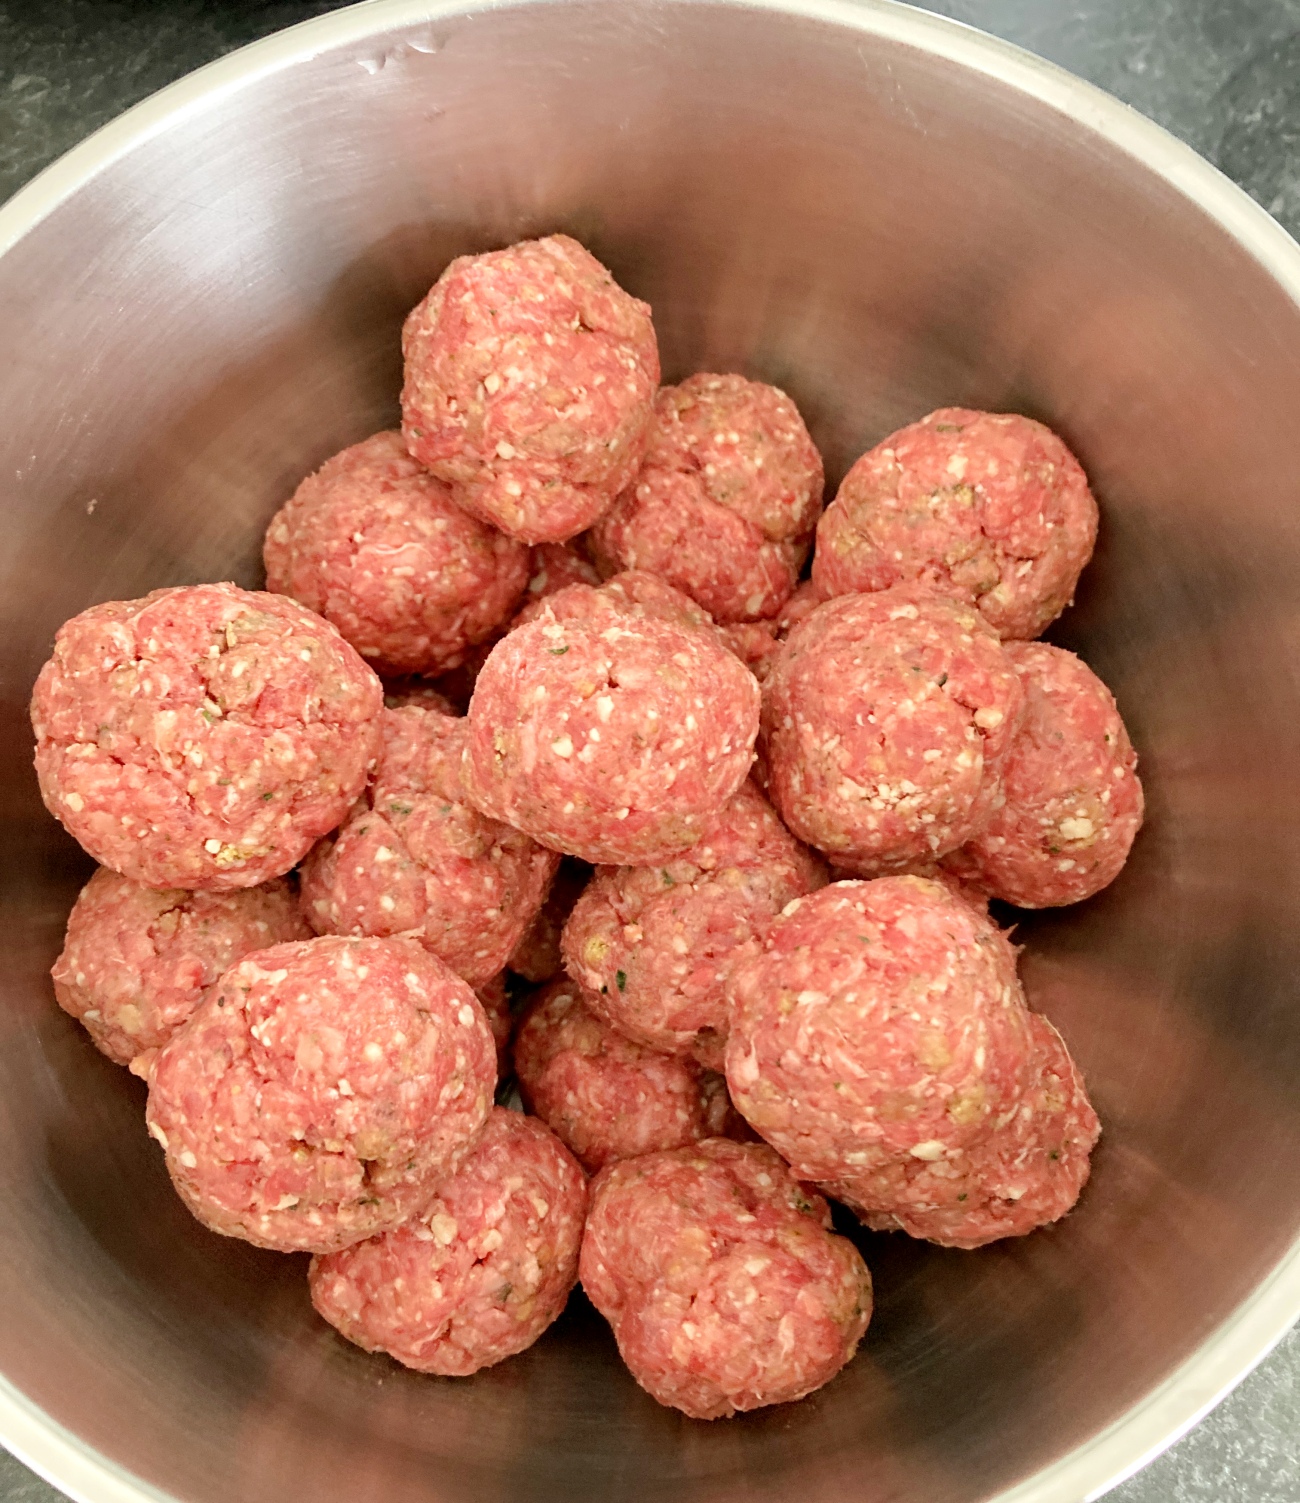 Combine beef with egg, breadcrumbs, Italian seasoning, onion powder, parmesan cheese, and parsley. Roll into balls 1” to 1 ½” across and set aside.